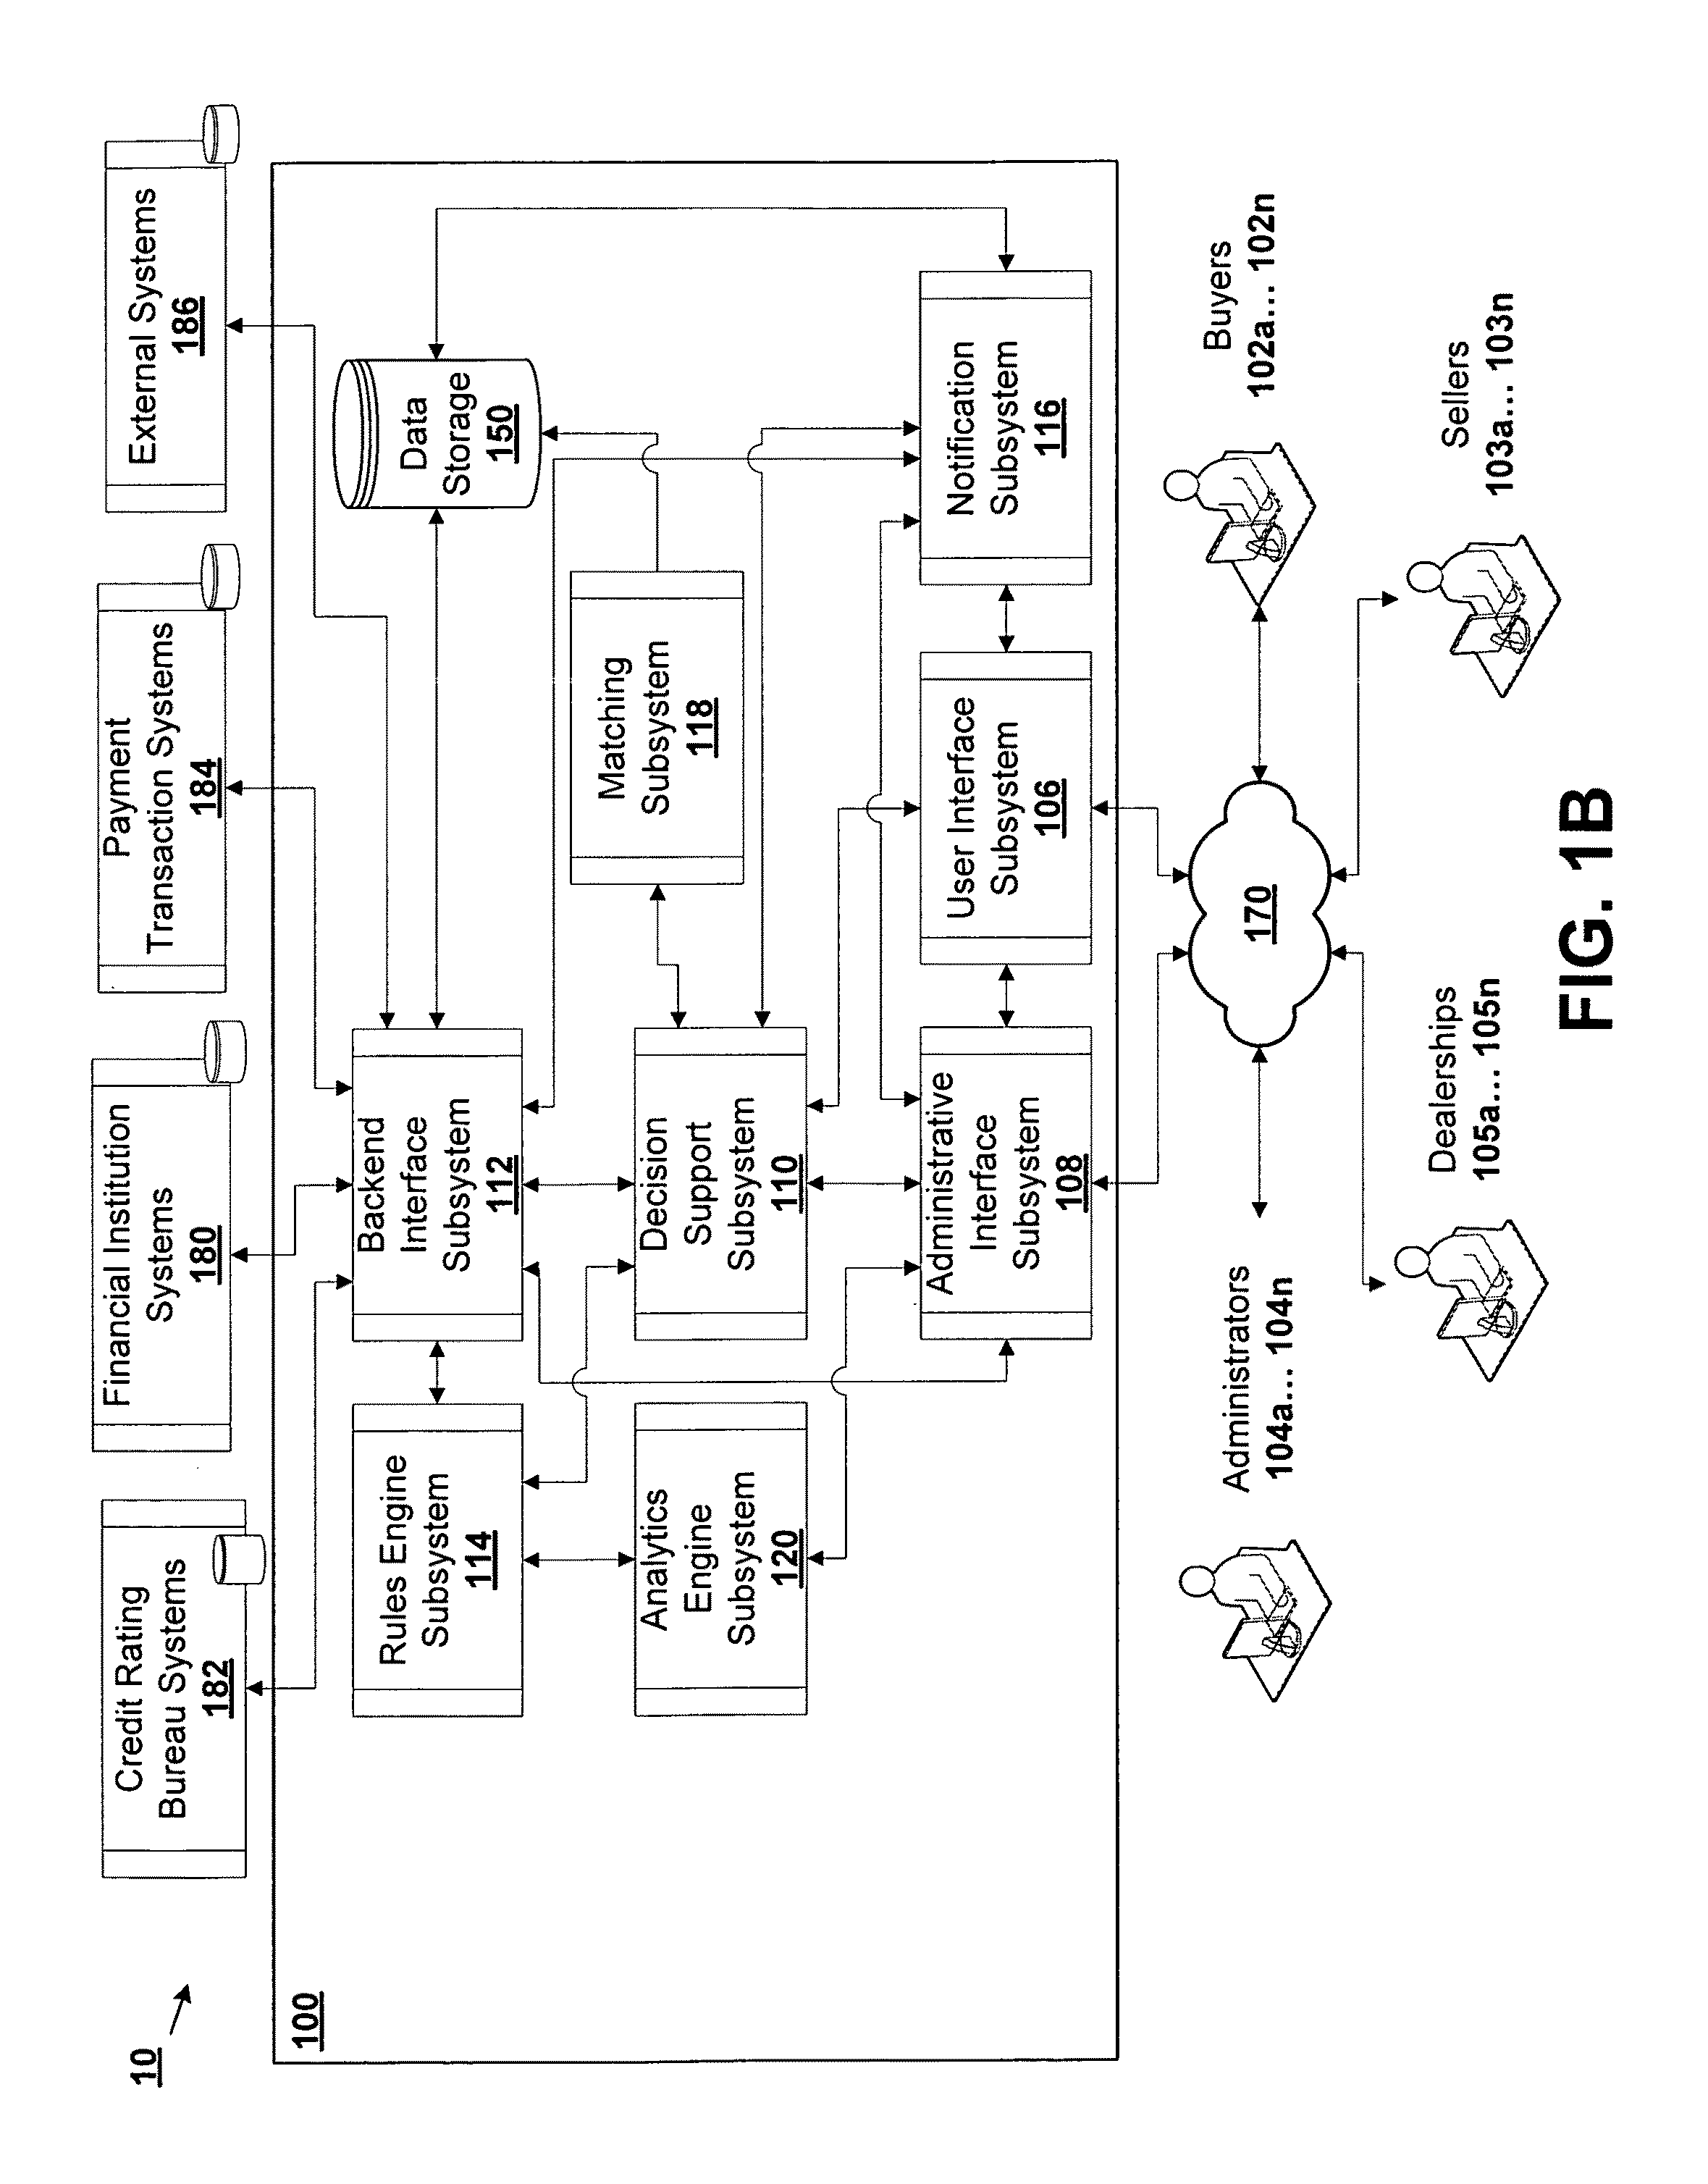 Systems and methods for presenting vehicular transaction information in a data communication network